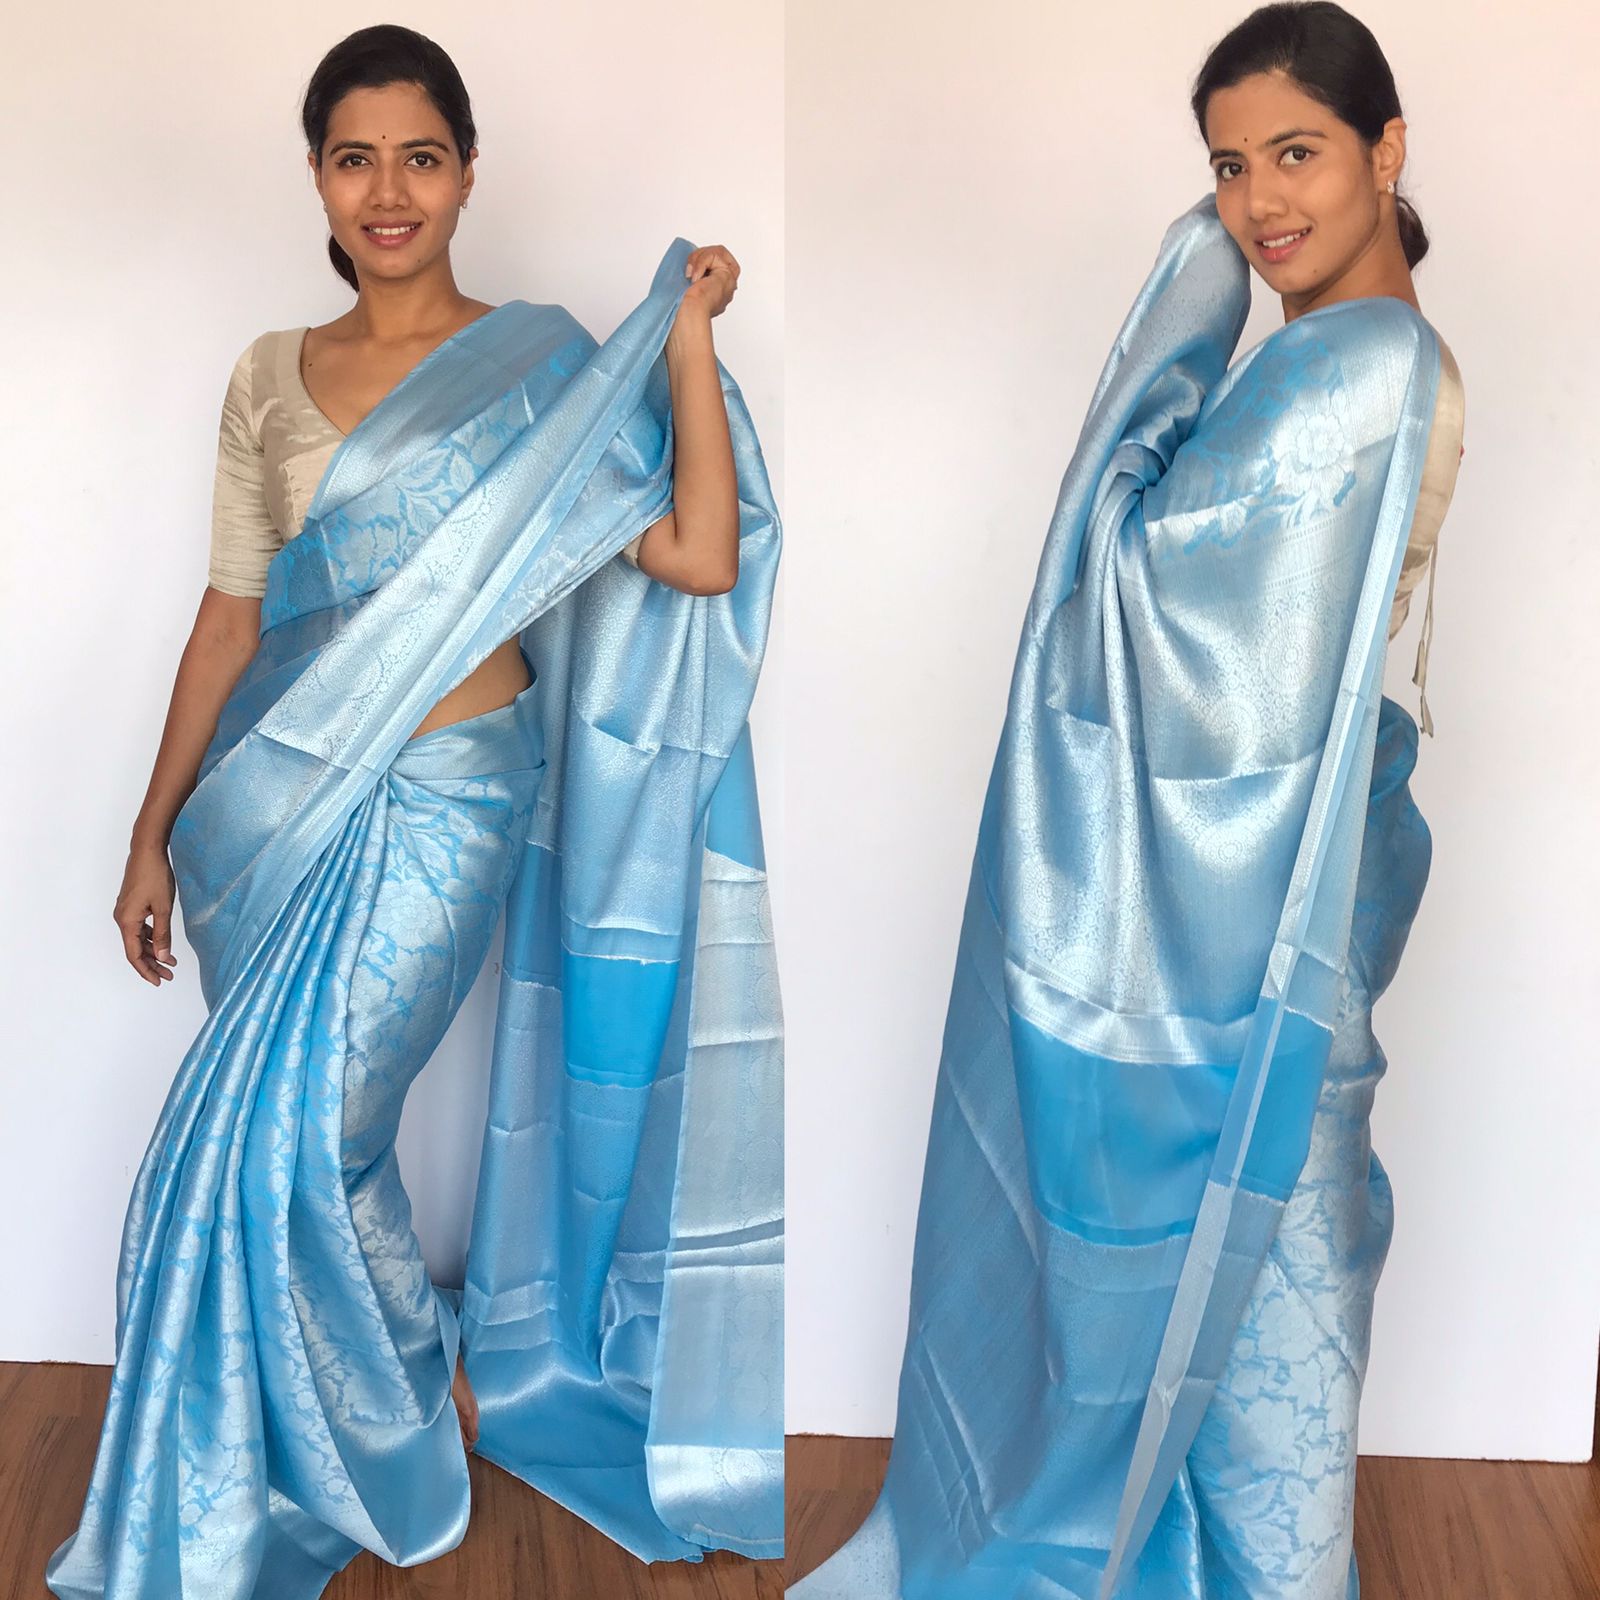 Sany Weaves - A saree is not just an outfit. It's an